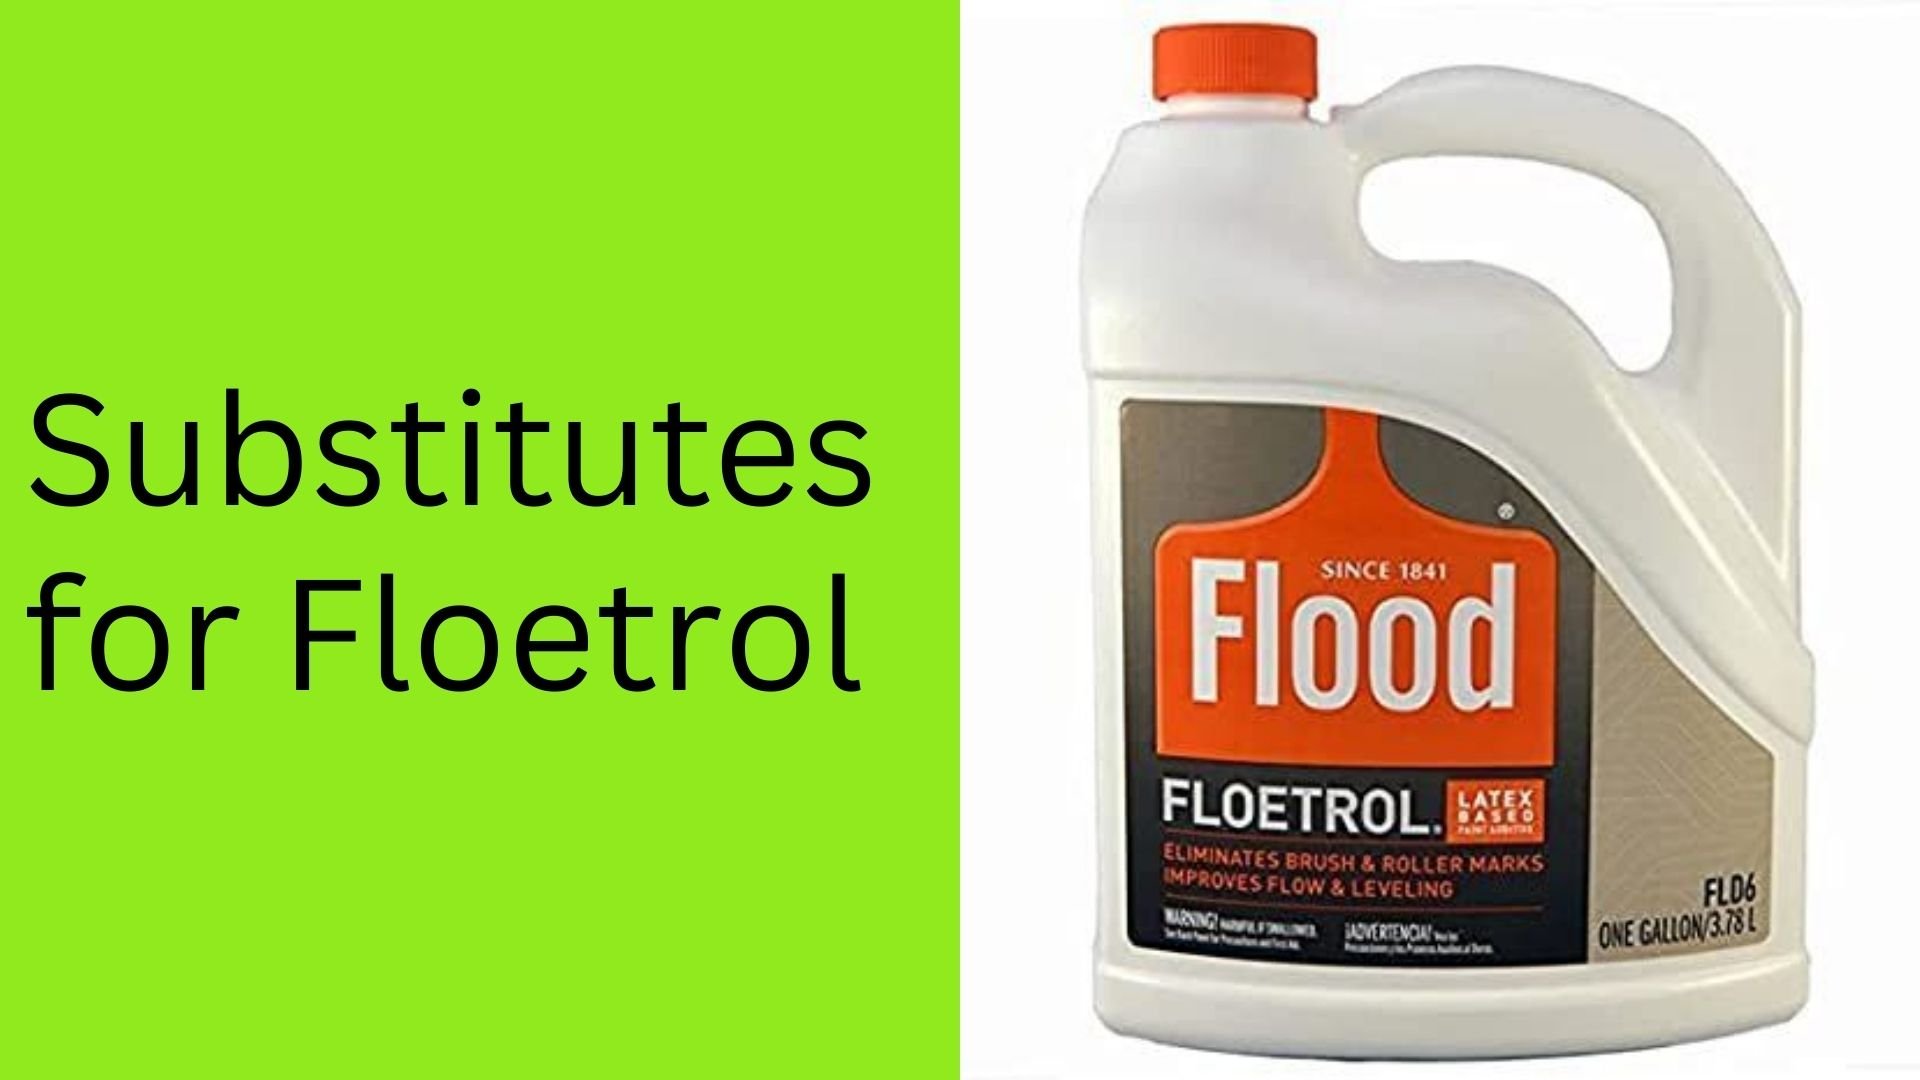 Substitutes for Floetrol